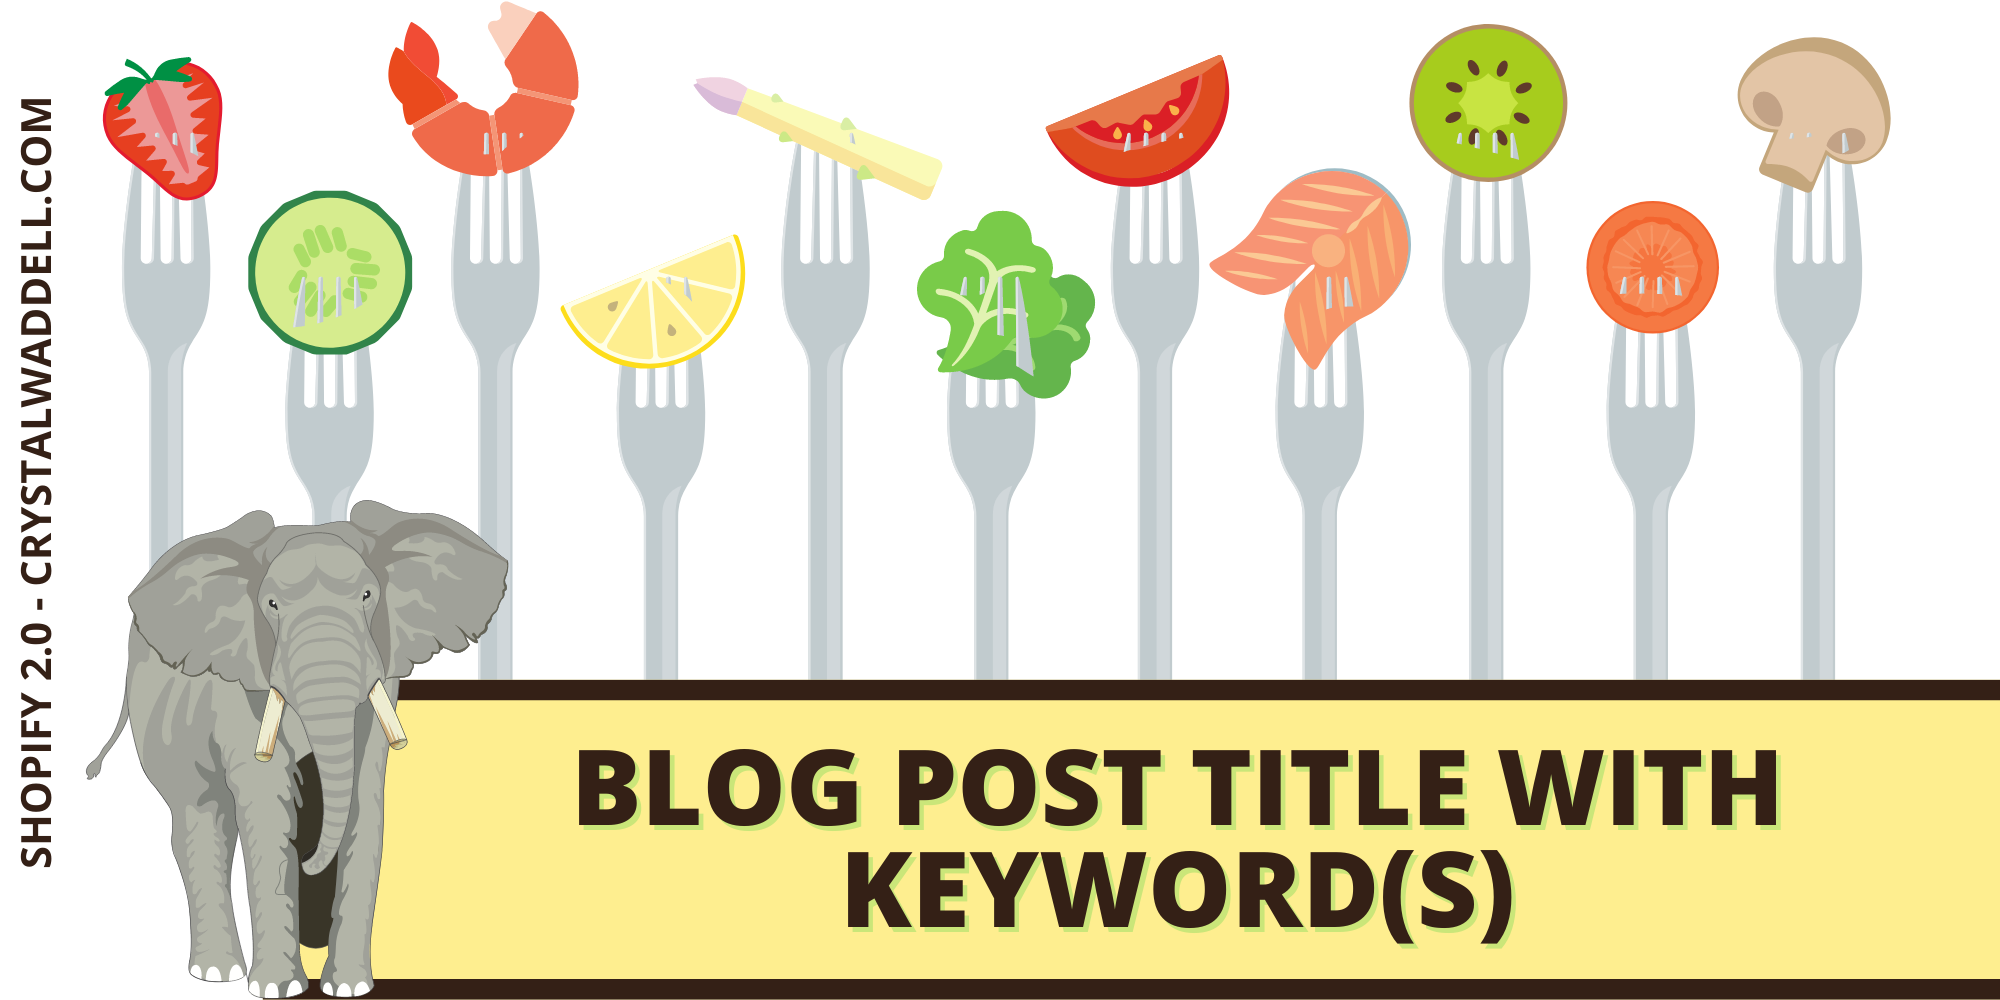 Grab attention with your keyword and blogger tactics like including numbers and brackets around your keywords.